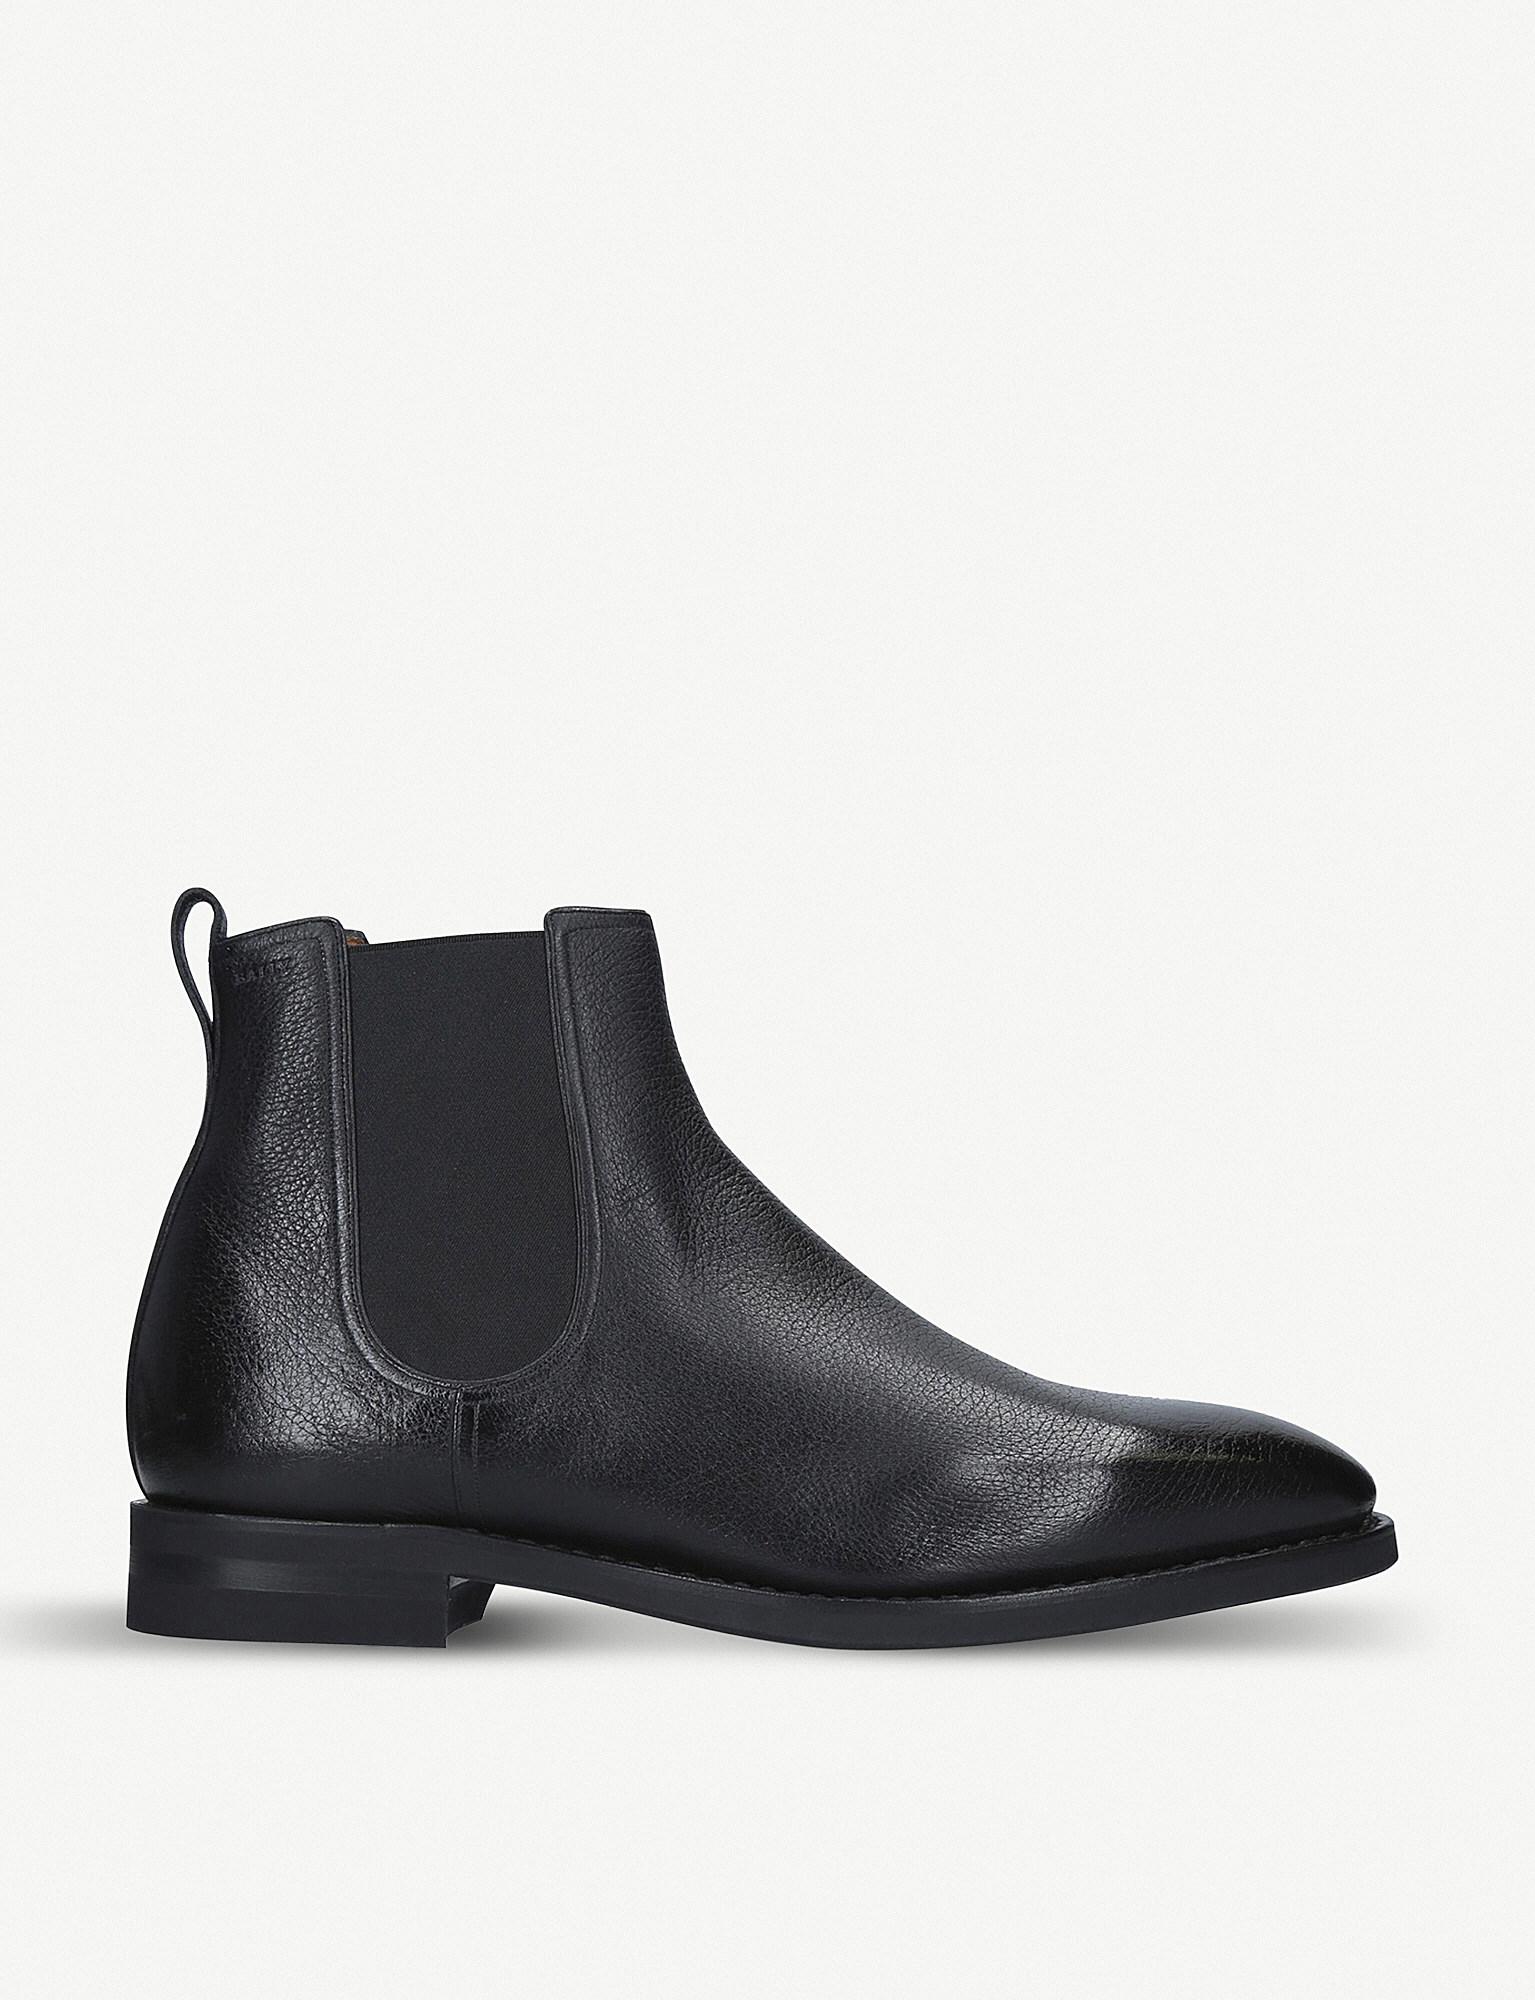 Lyst - Bally Scavone Leather Chelsea Boots in Black for Men